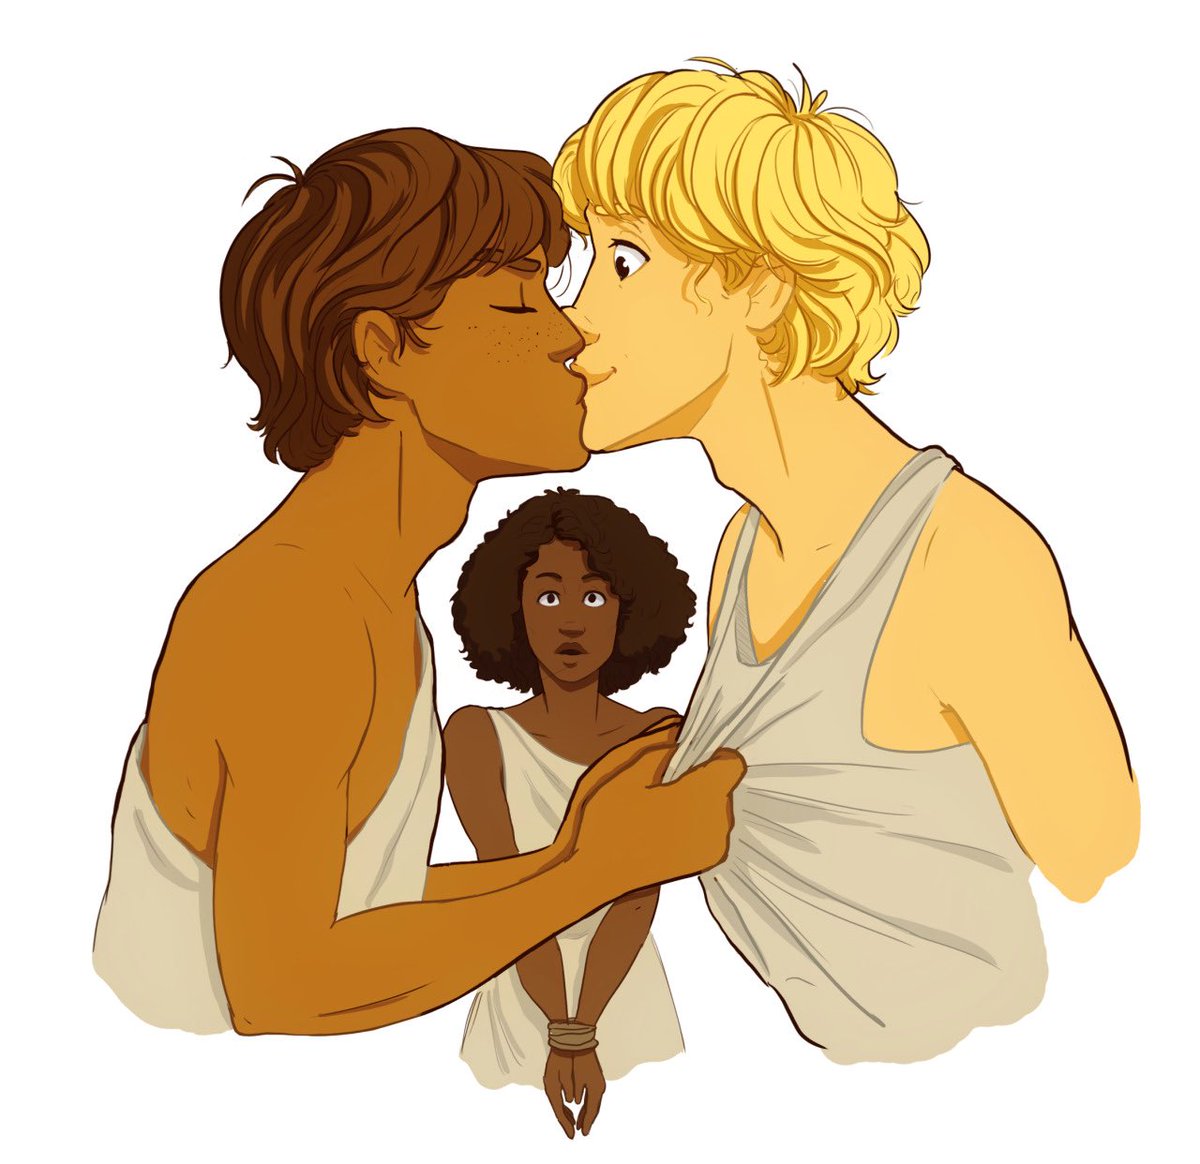 Today is dedicated to Achilles and Patroclus fan art onlypic.twitter.com/9t...